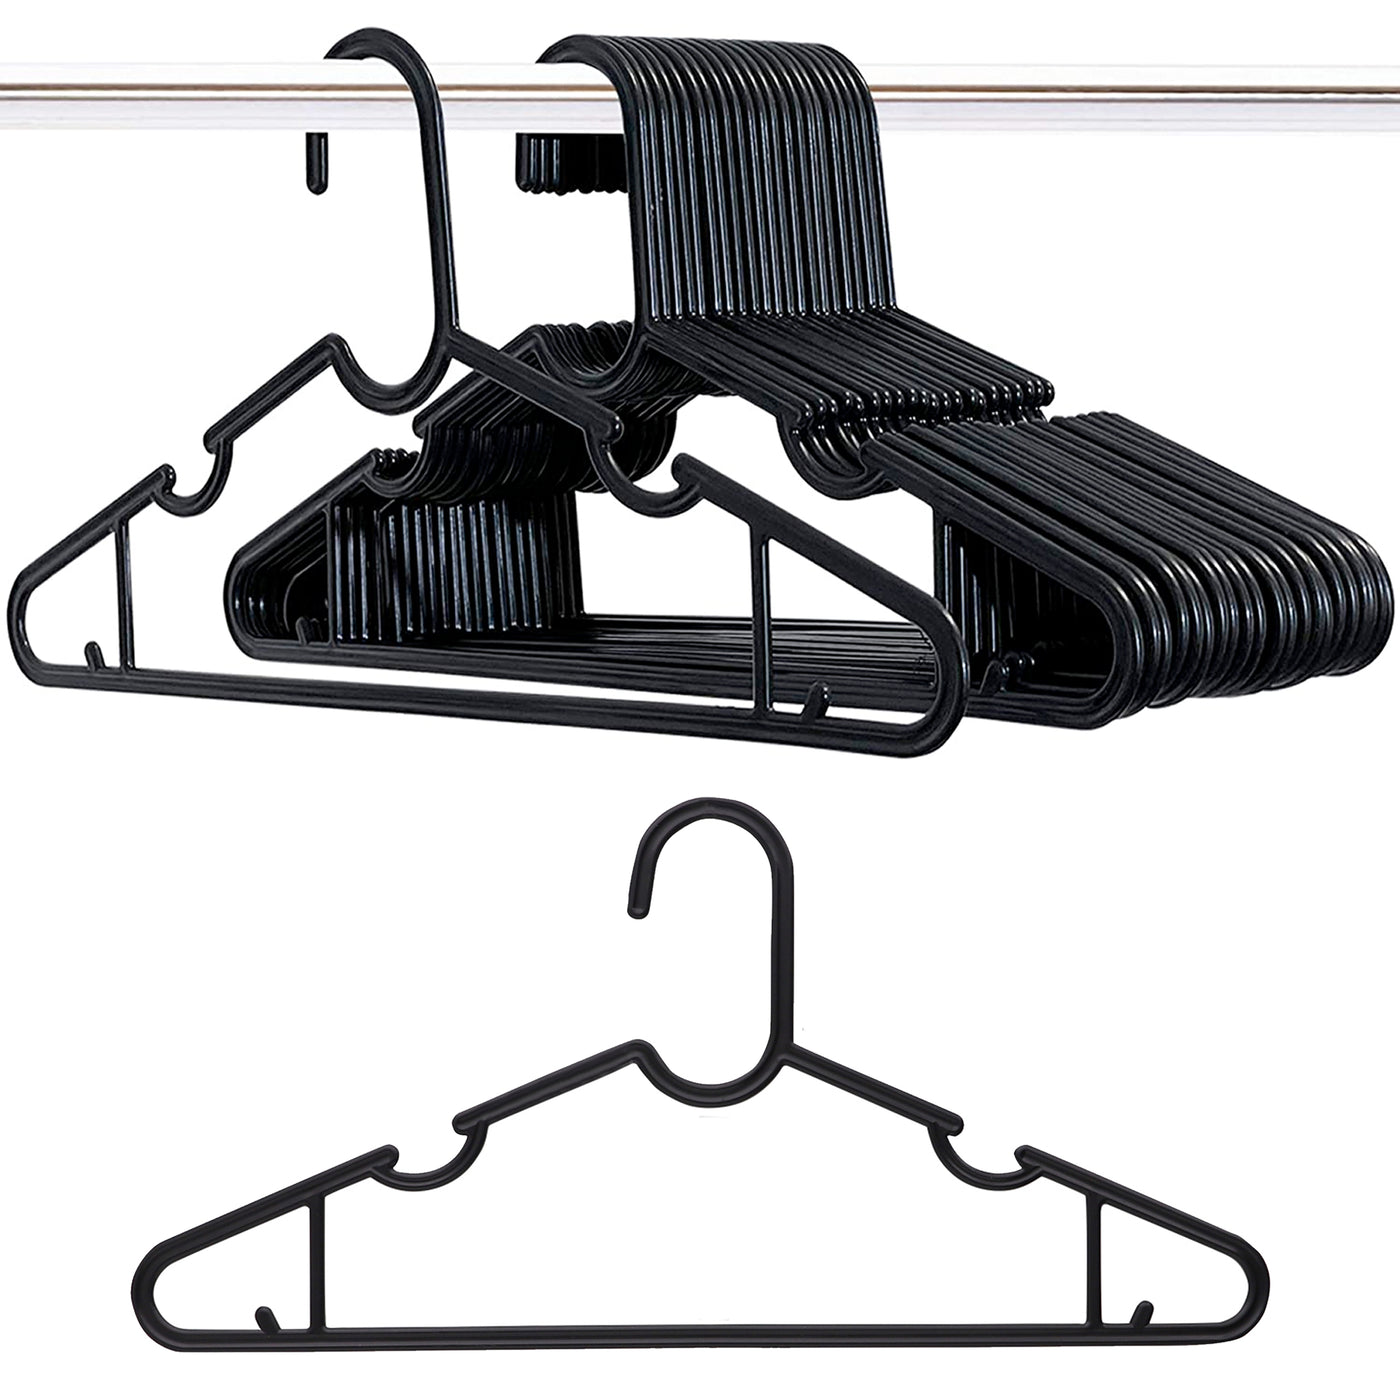 Clothes White Plastic Hangers With Bar Hooks Heavy Duty Standard